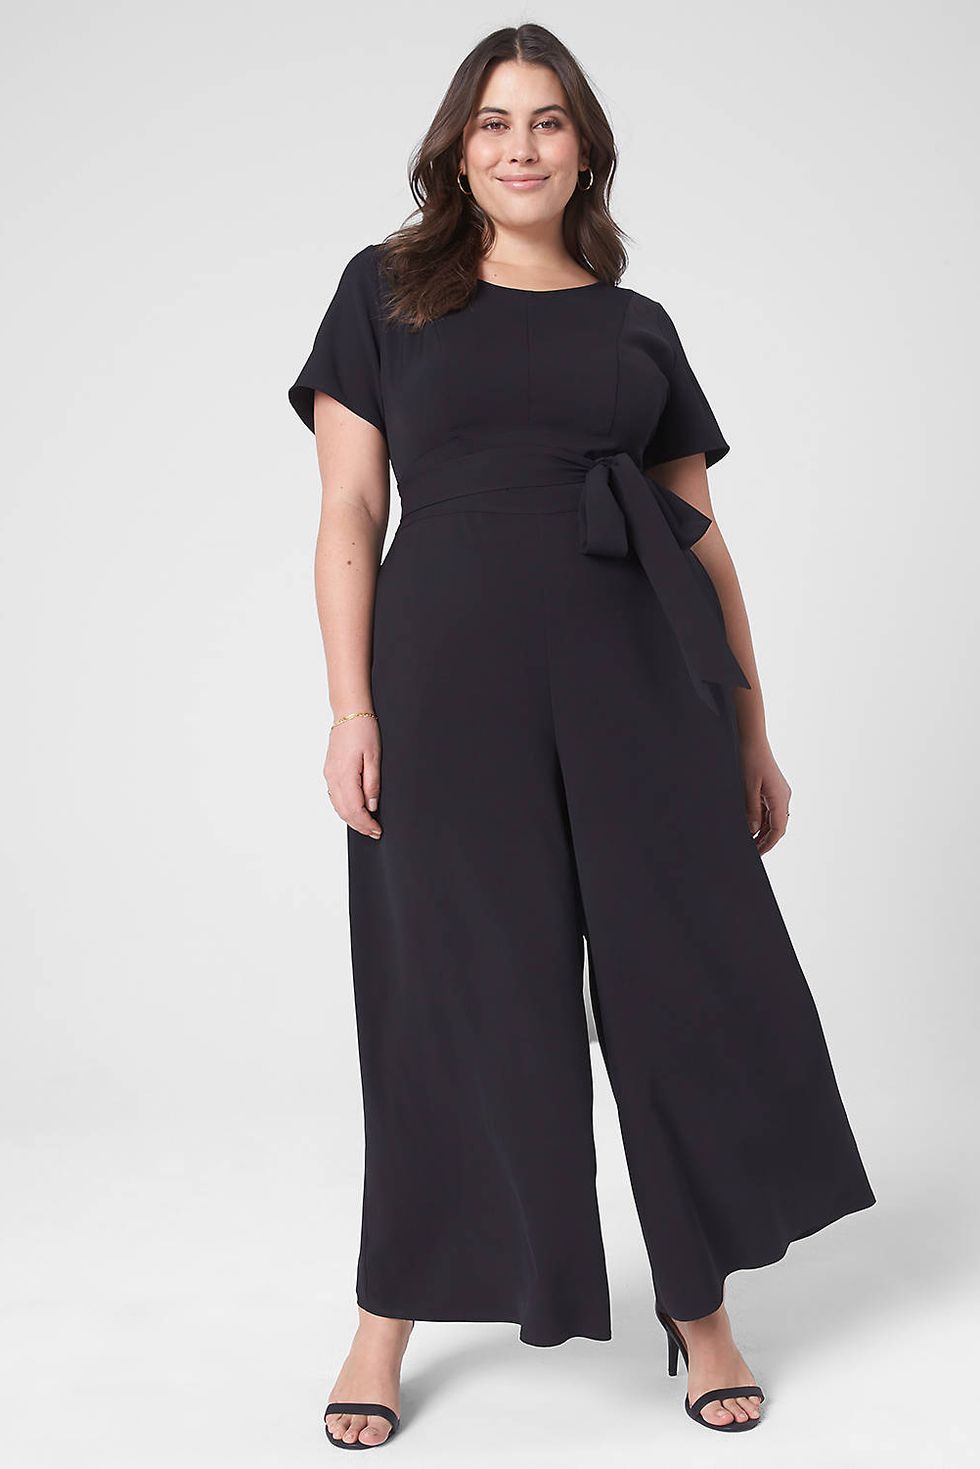 Plus Size Wedding Guest Outfits